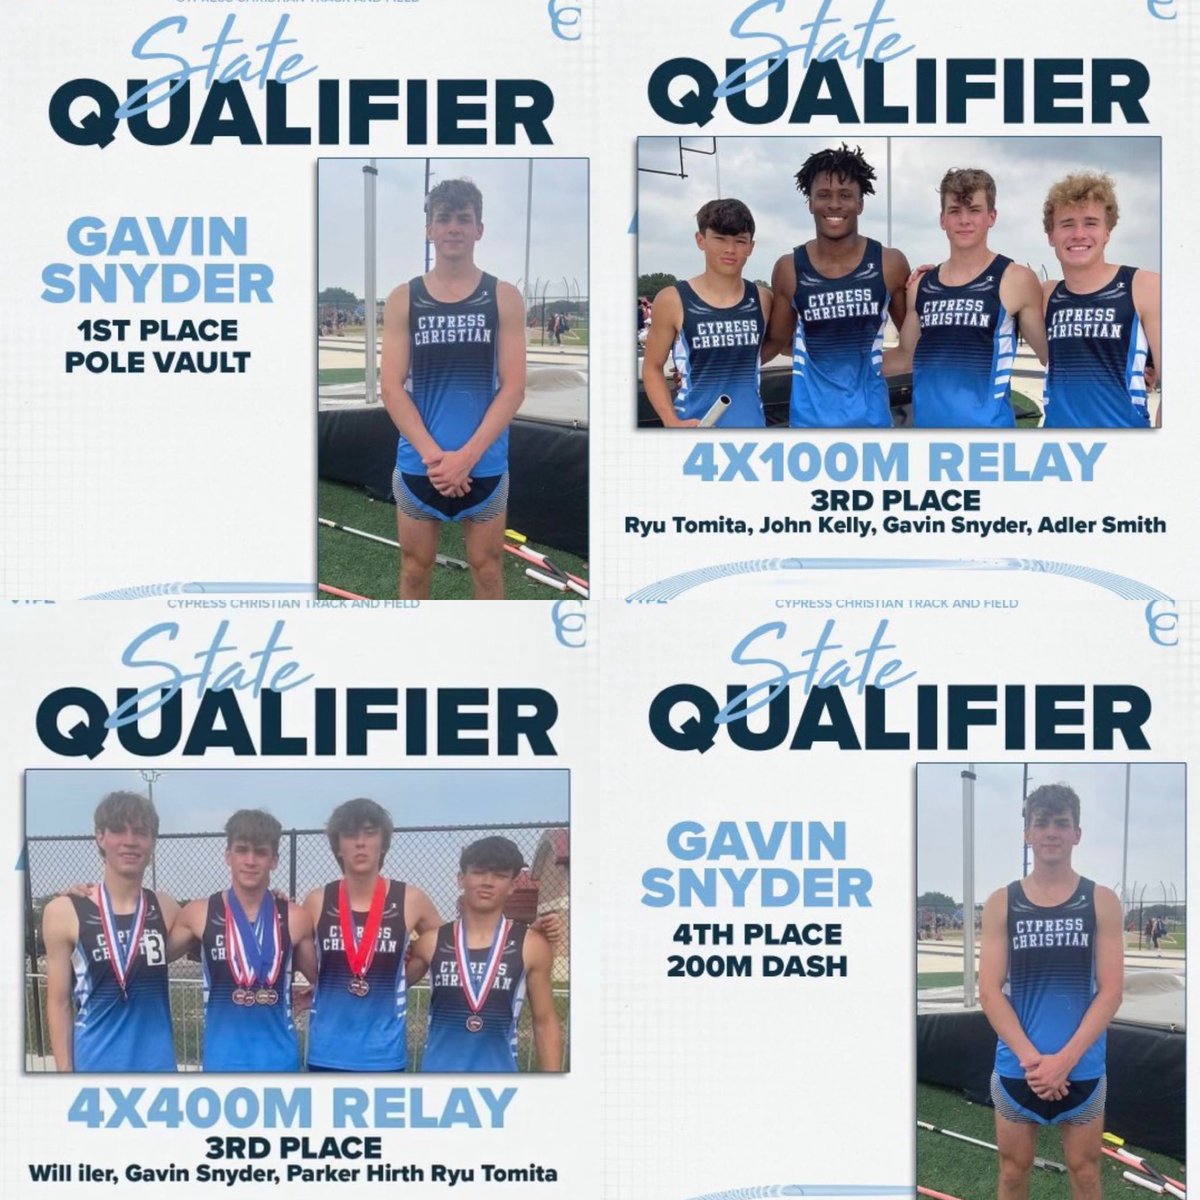 Gavin Snyder- State Bound in all 4 events!
Polevault
4x100
200
4x4